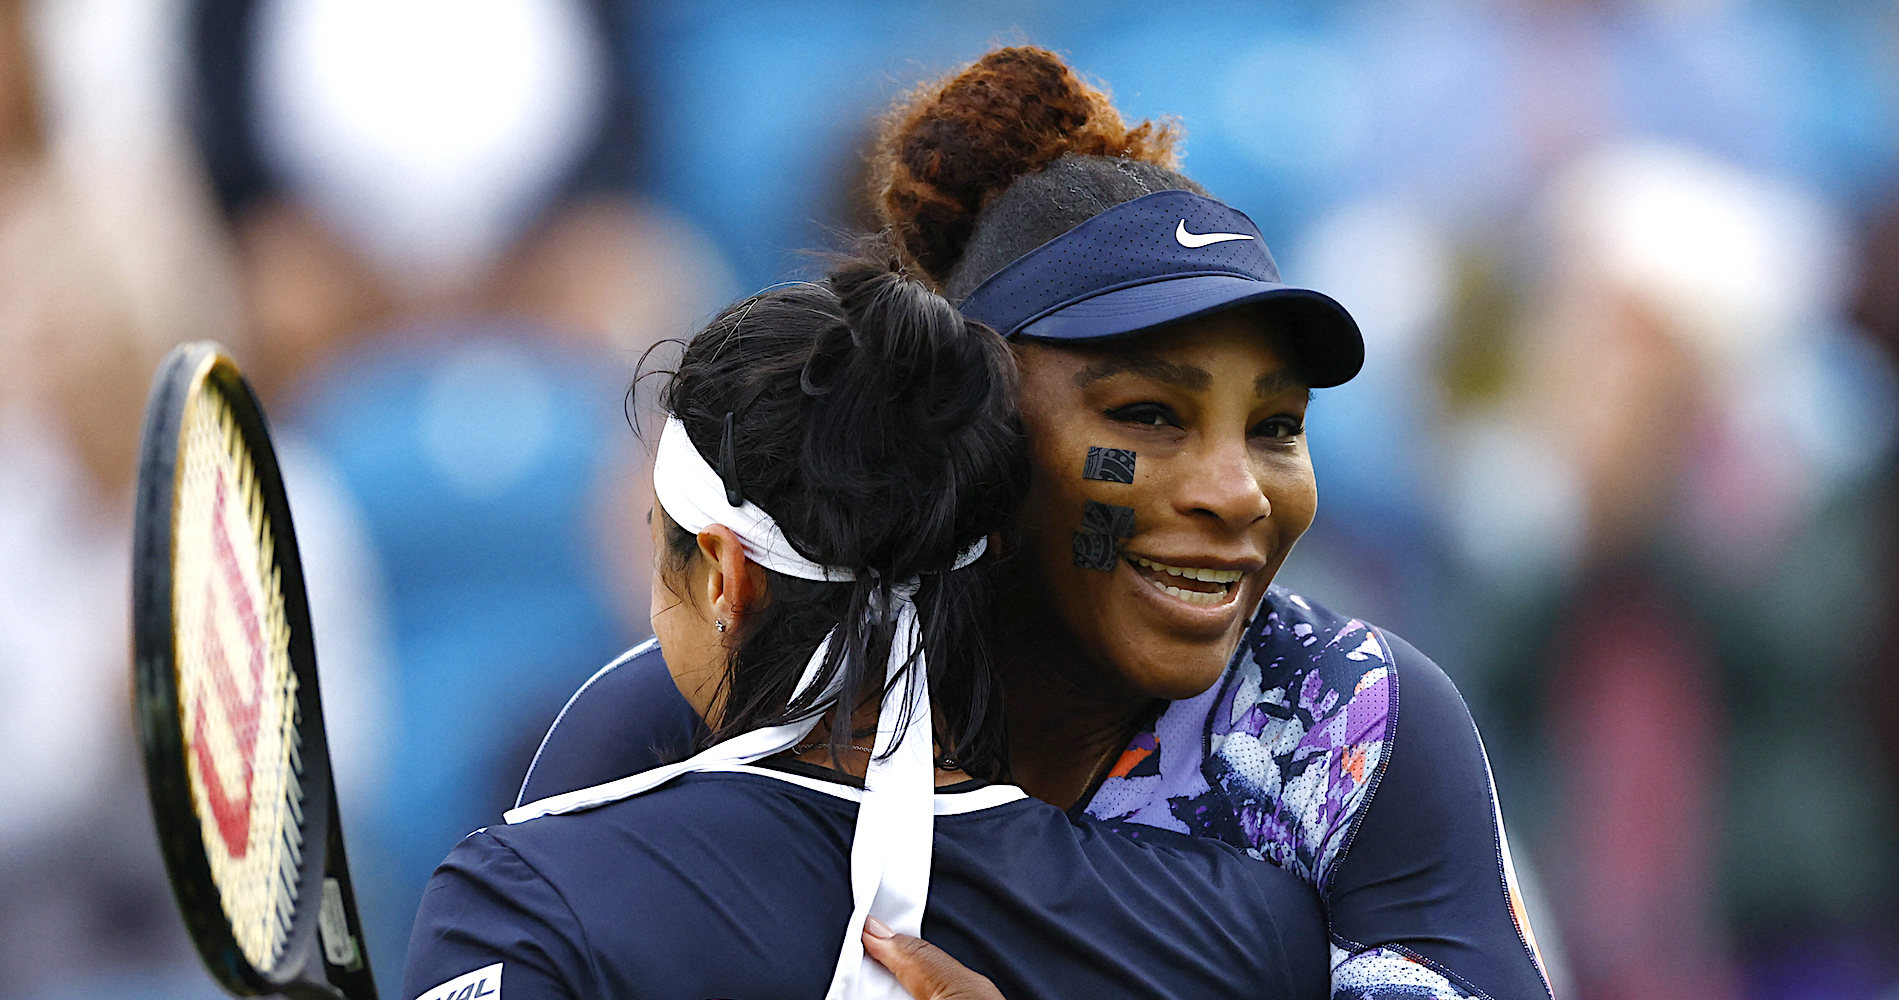 Serena Williams with Ons Jabeur, Eastbourne 2022